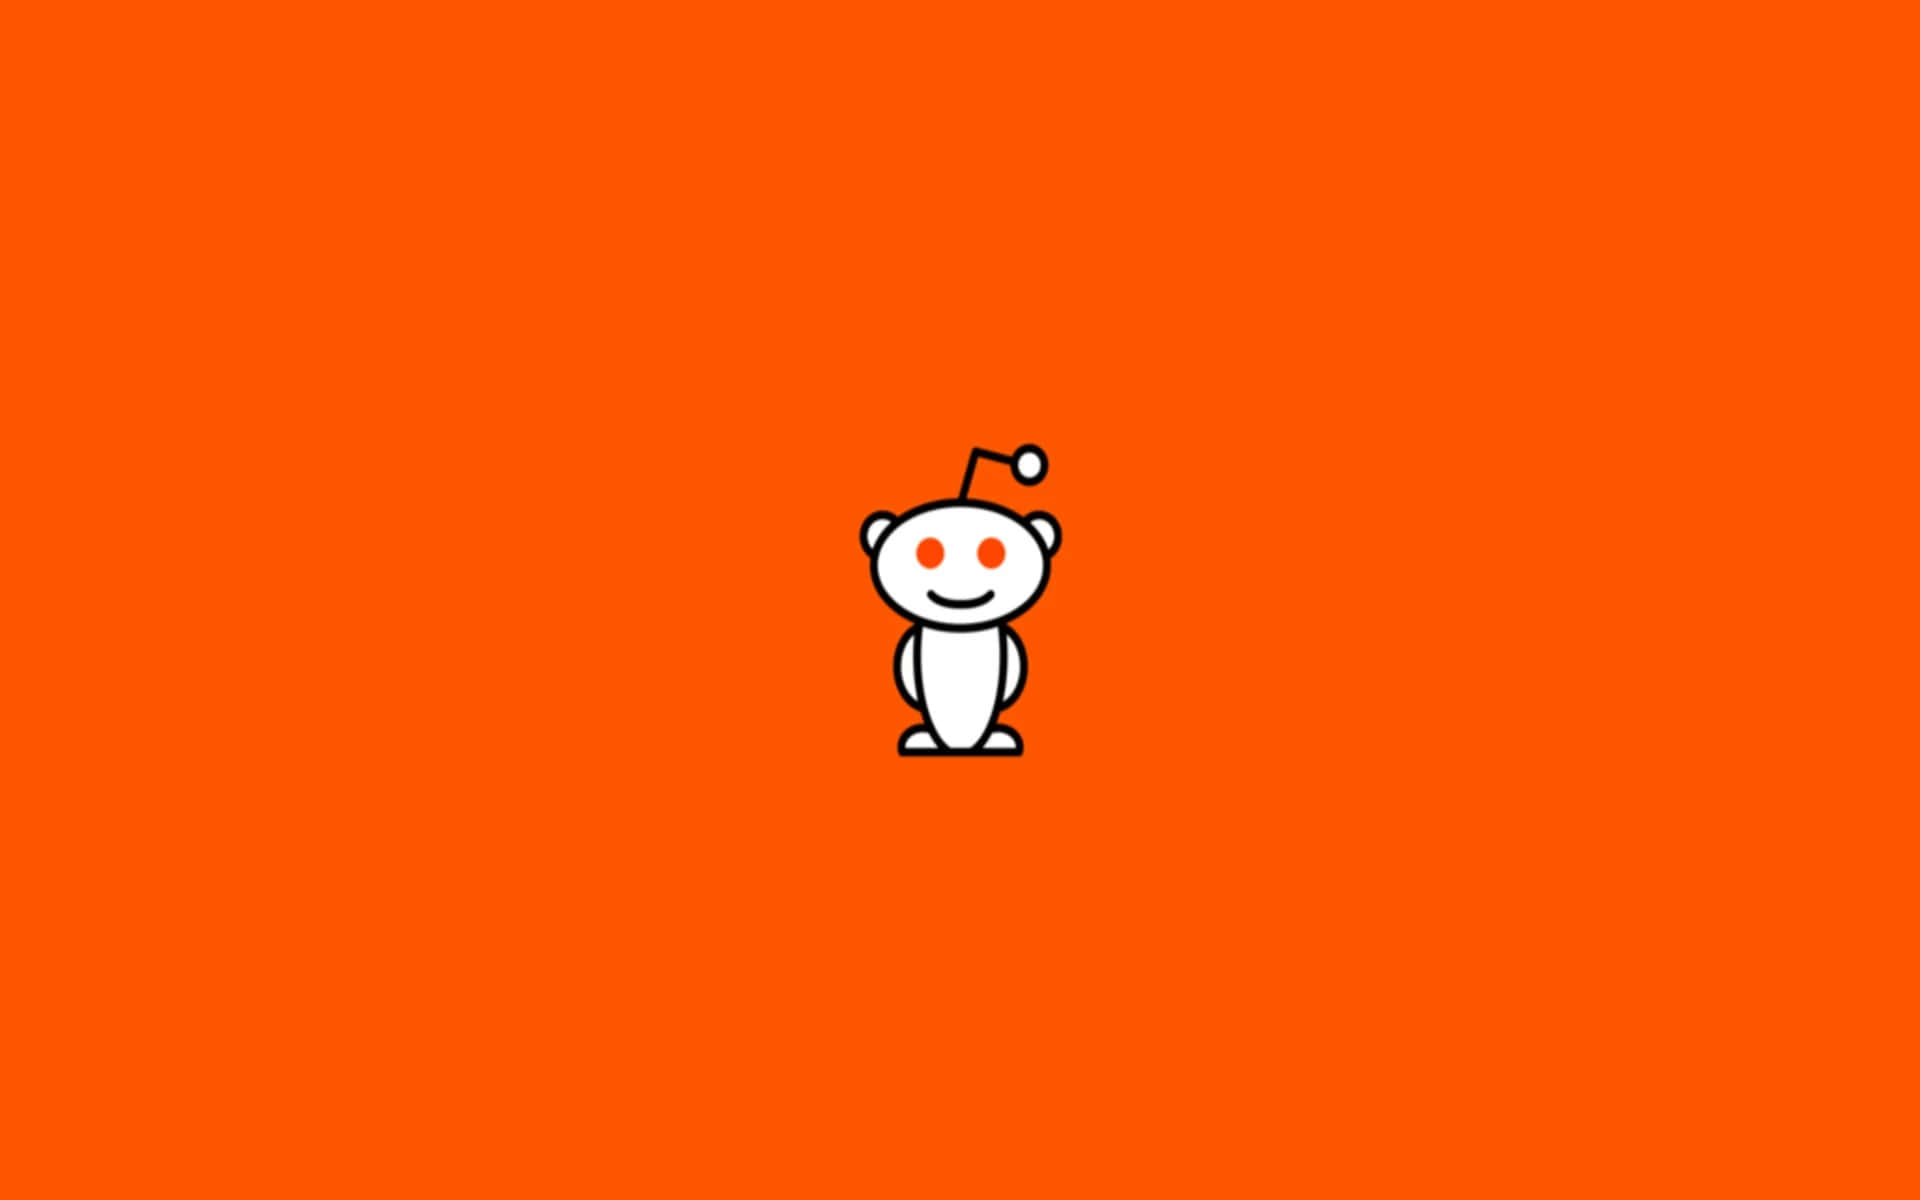 A White Cartoon Character On An Orange Background